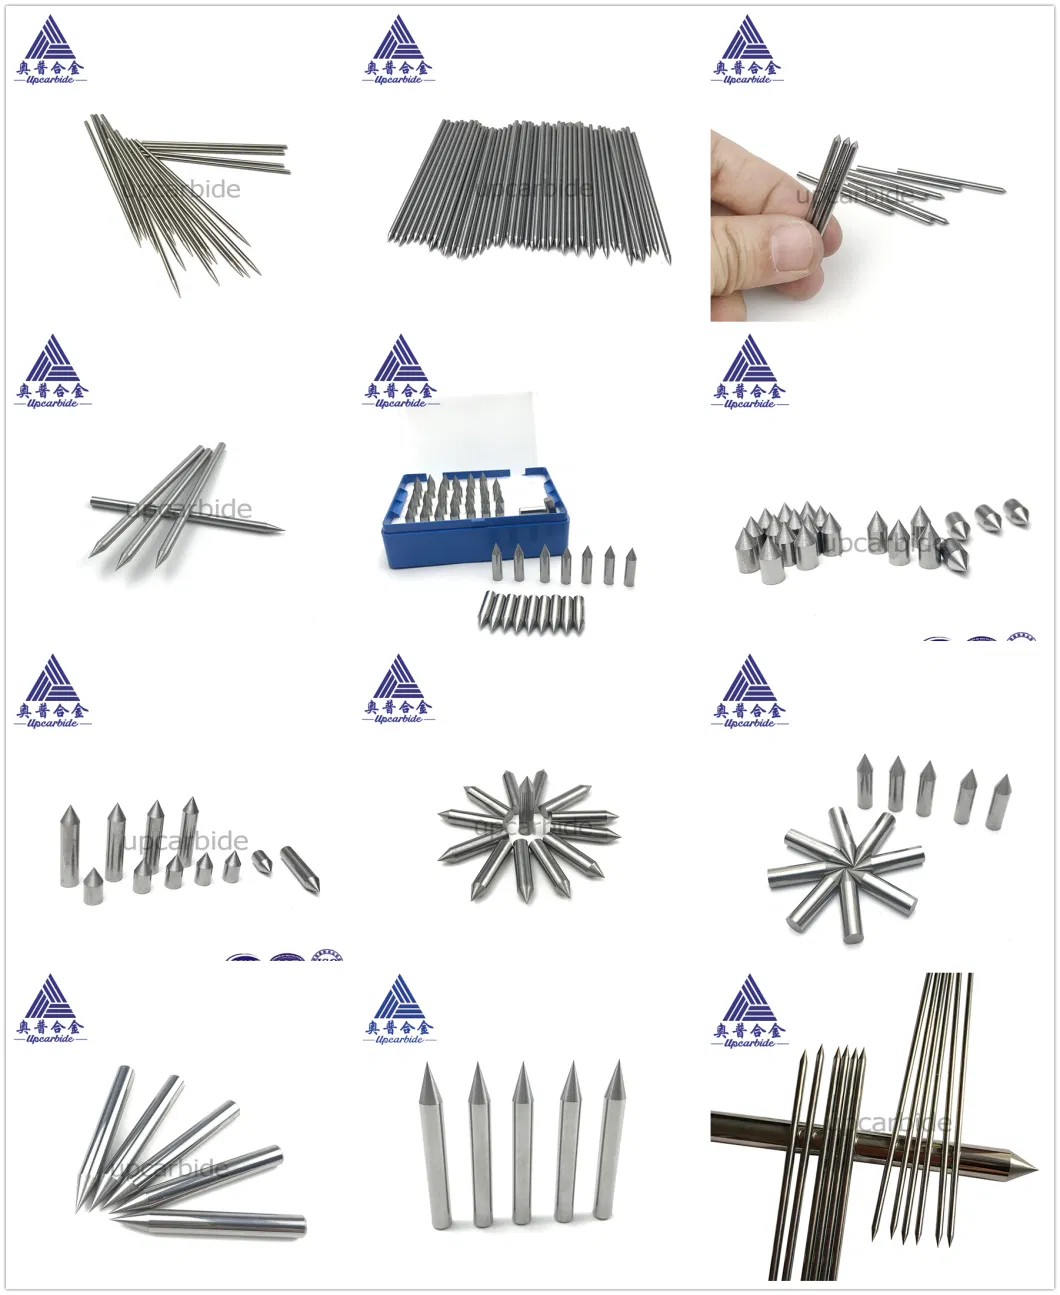 Diameter 6mm Length 50mm Hardness From 90.5~94hra Wc Alloy Steel Tungsten Carbide Needle